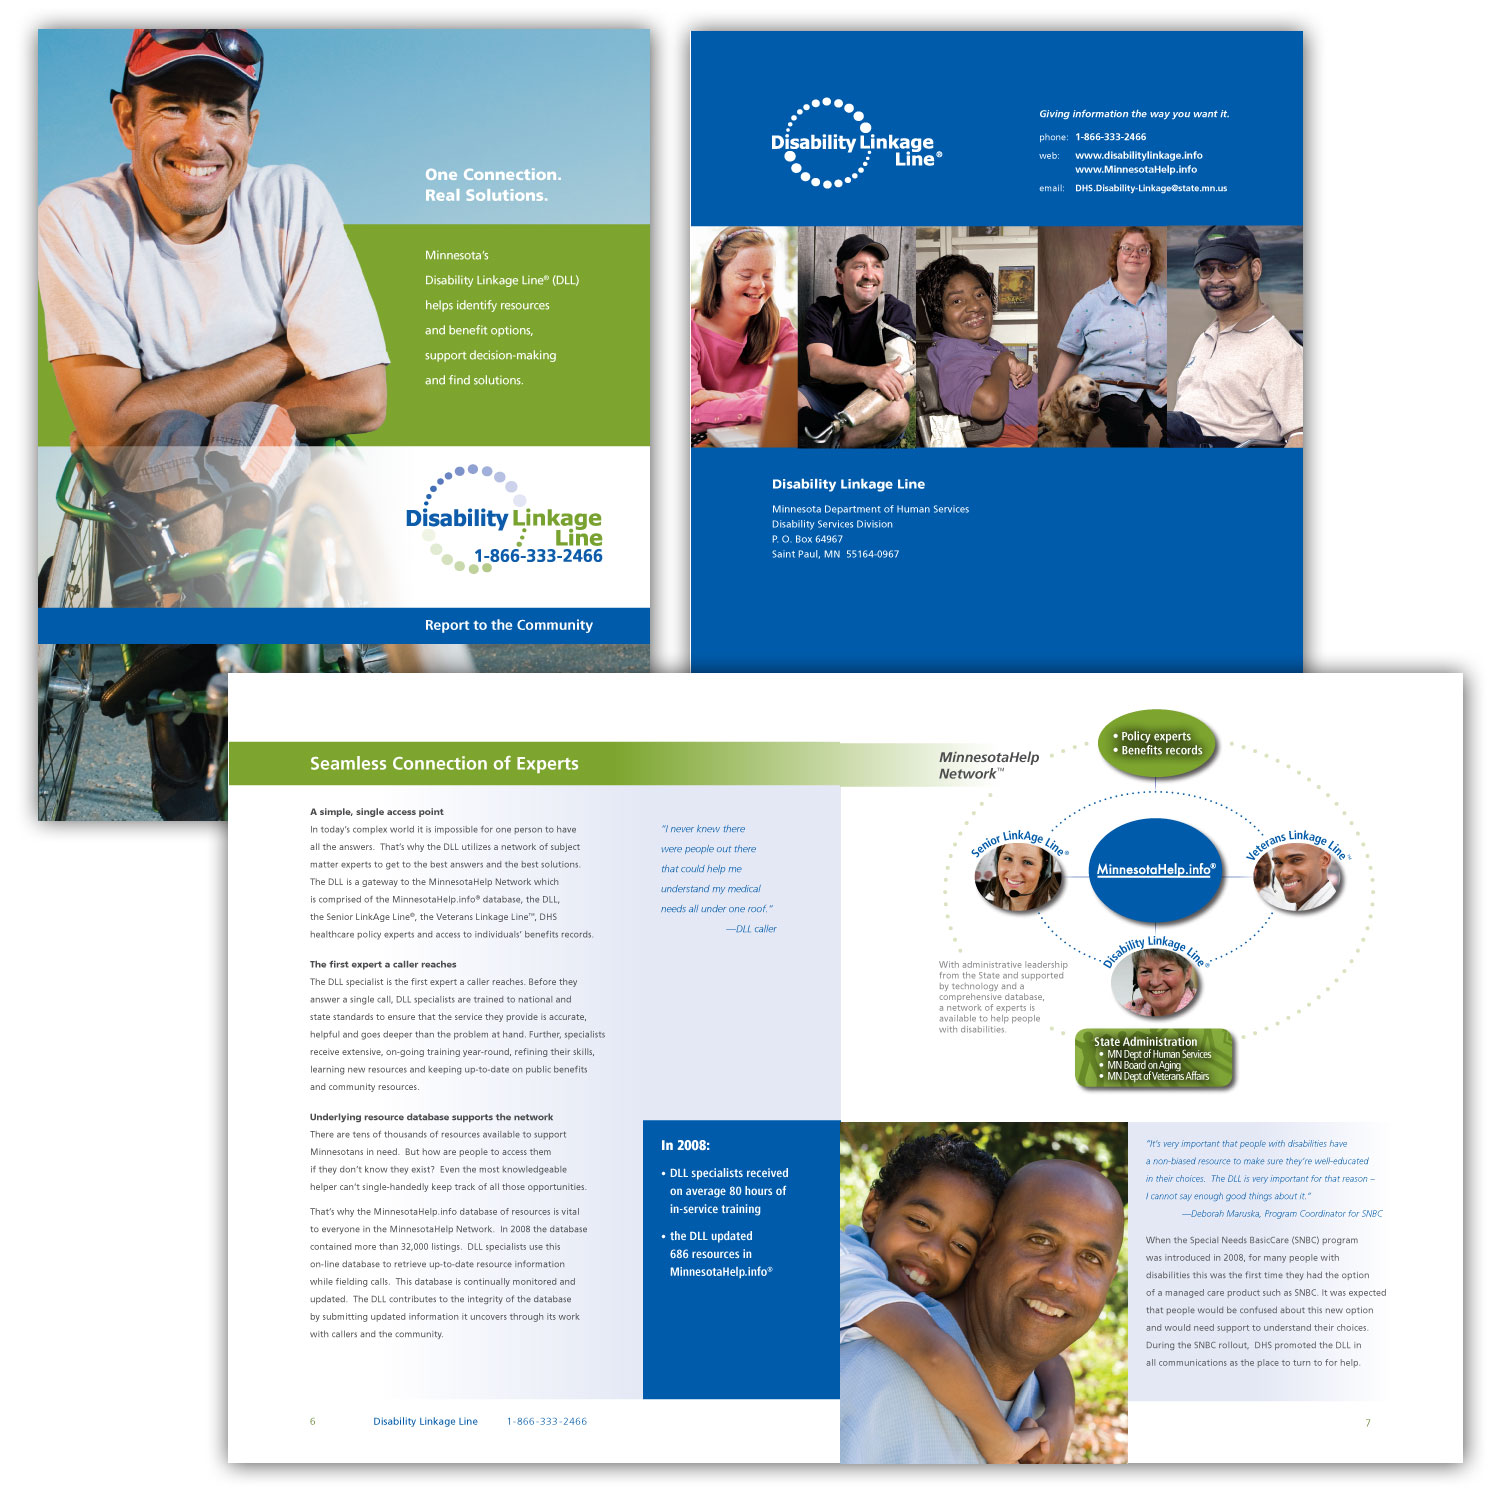   One Connection. Real Solutions.   Seth Levin &amp; Associates Disability Linkage Line     This information booklet describes how Minnesota’s Disability Linkage Line is a one-stop connection to find whatever is needed for a person’s situation. These